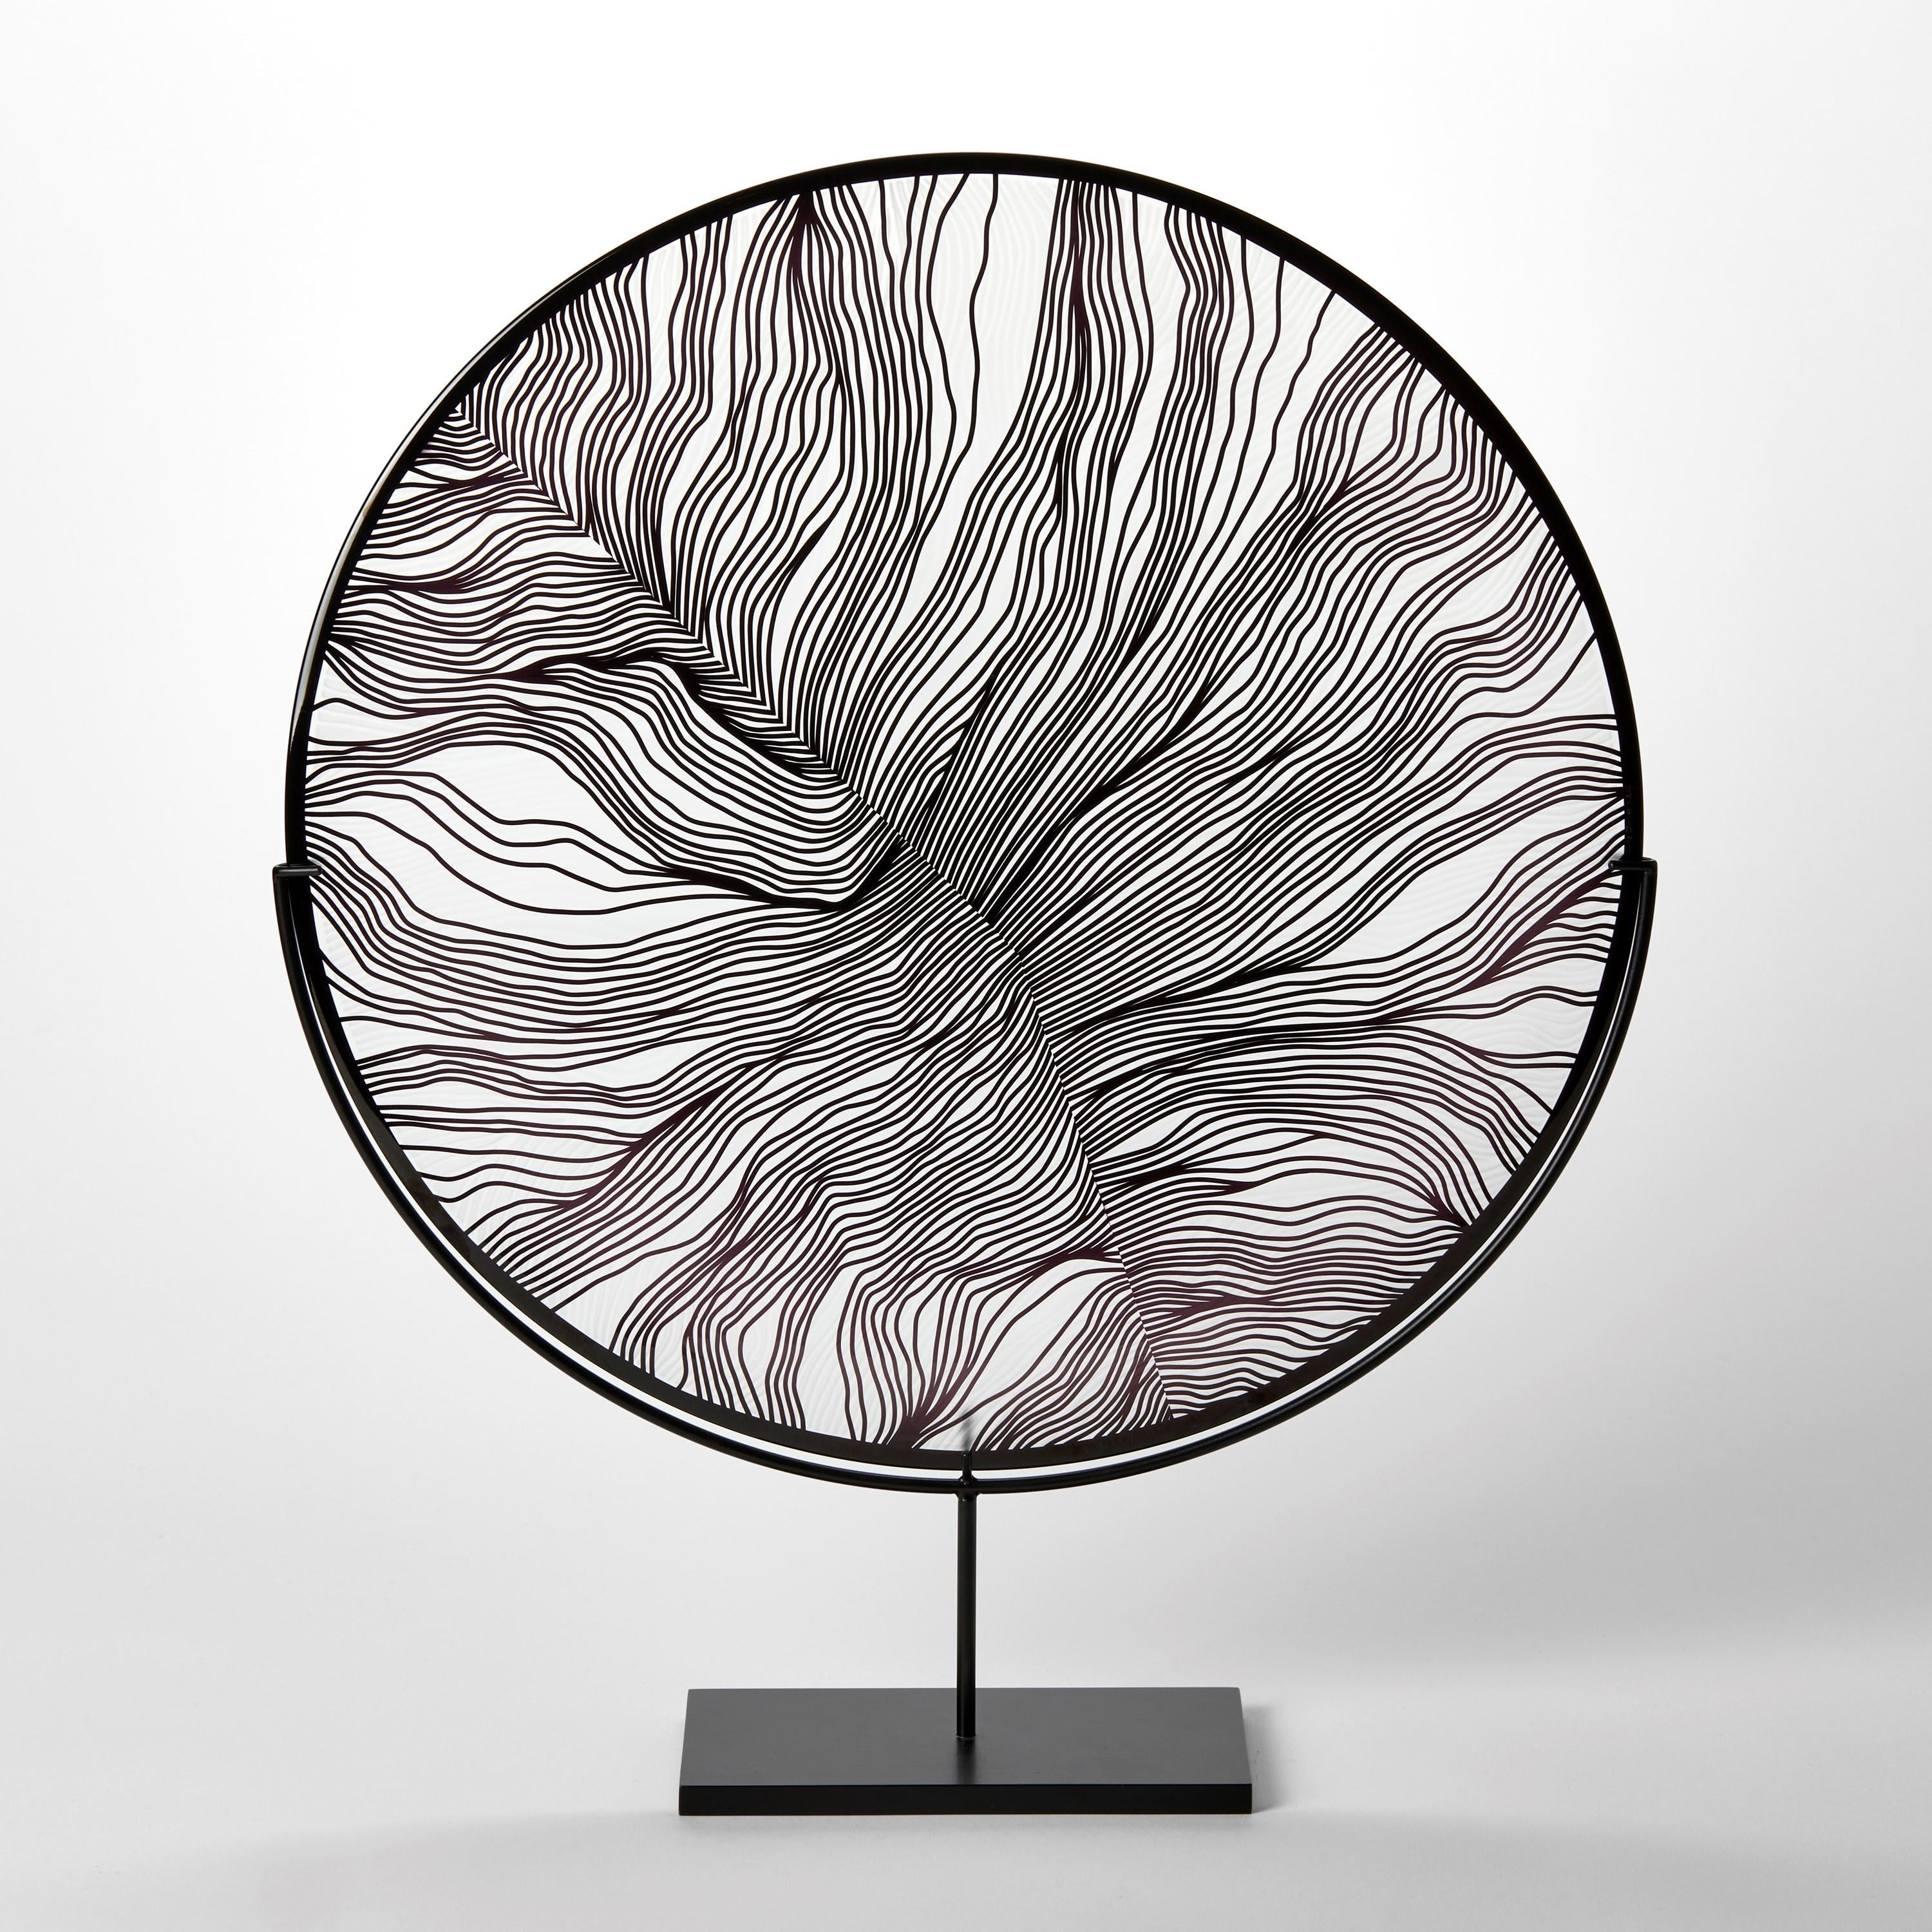 'Solar Storm Monochrome I' is a unique handblown and cut glass artwork by the British artist, Kate Jones of Gillies Jones.

Created with Stephen Gillies, with whom Jones makes many works in collaboration, these exquisite sculptural plates are